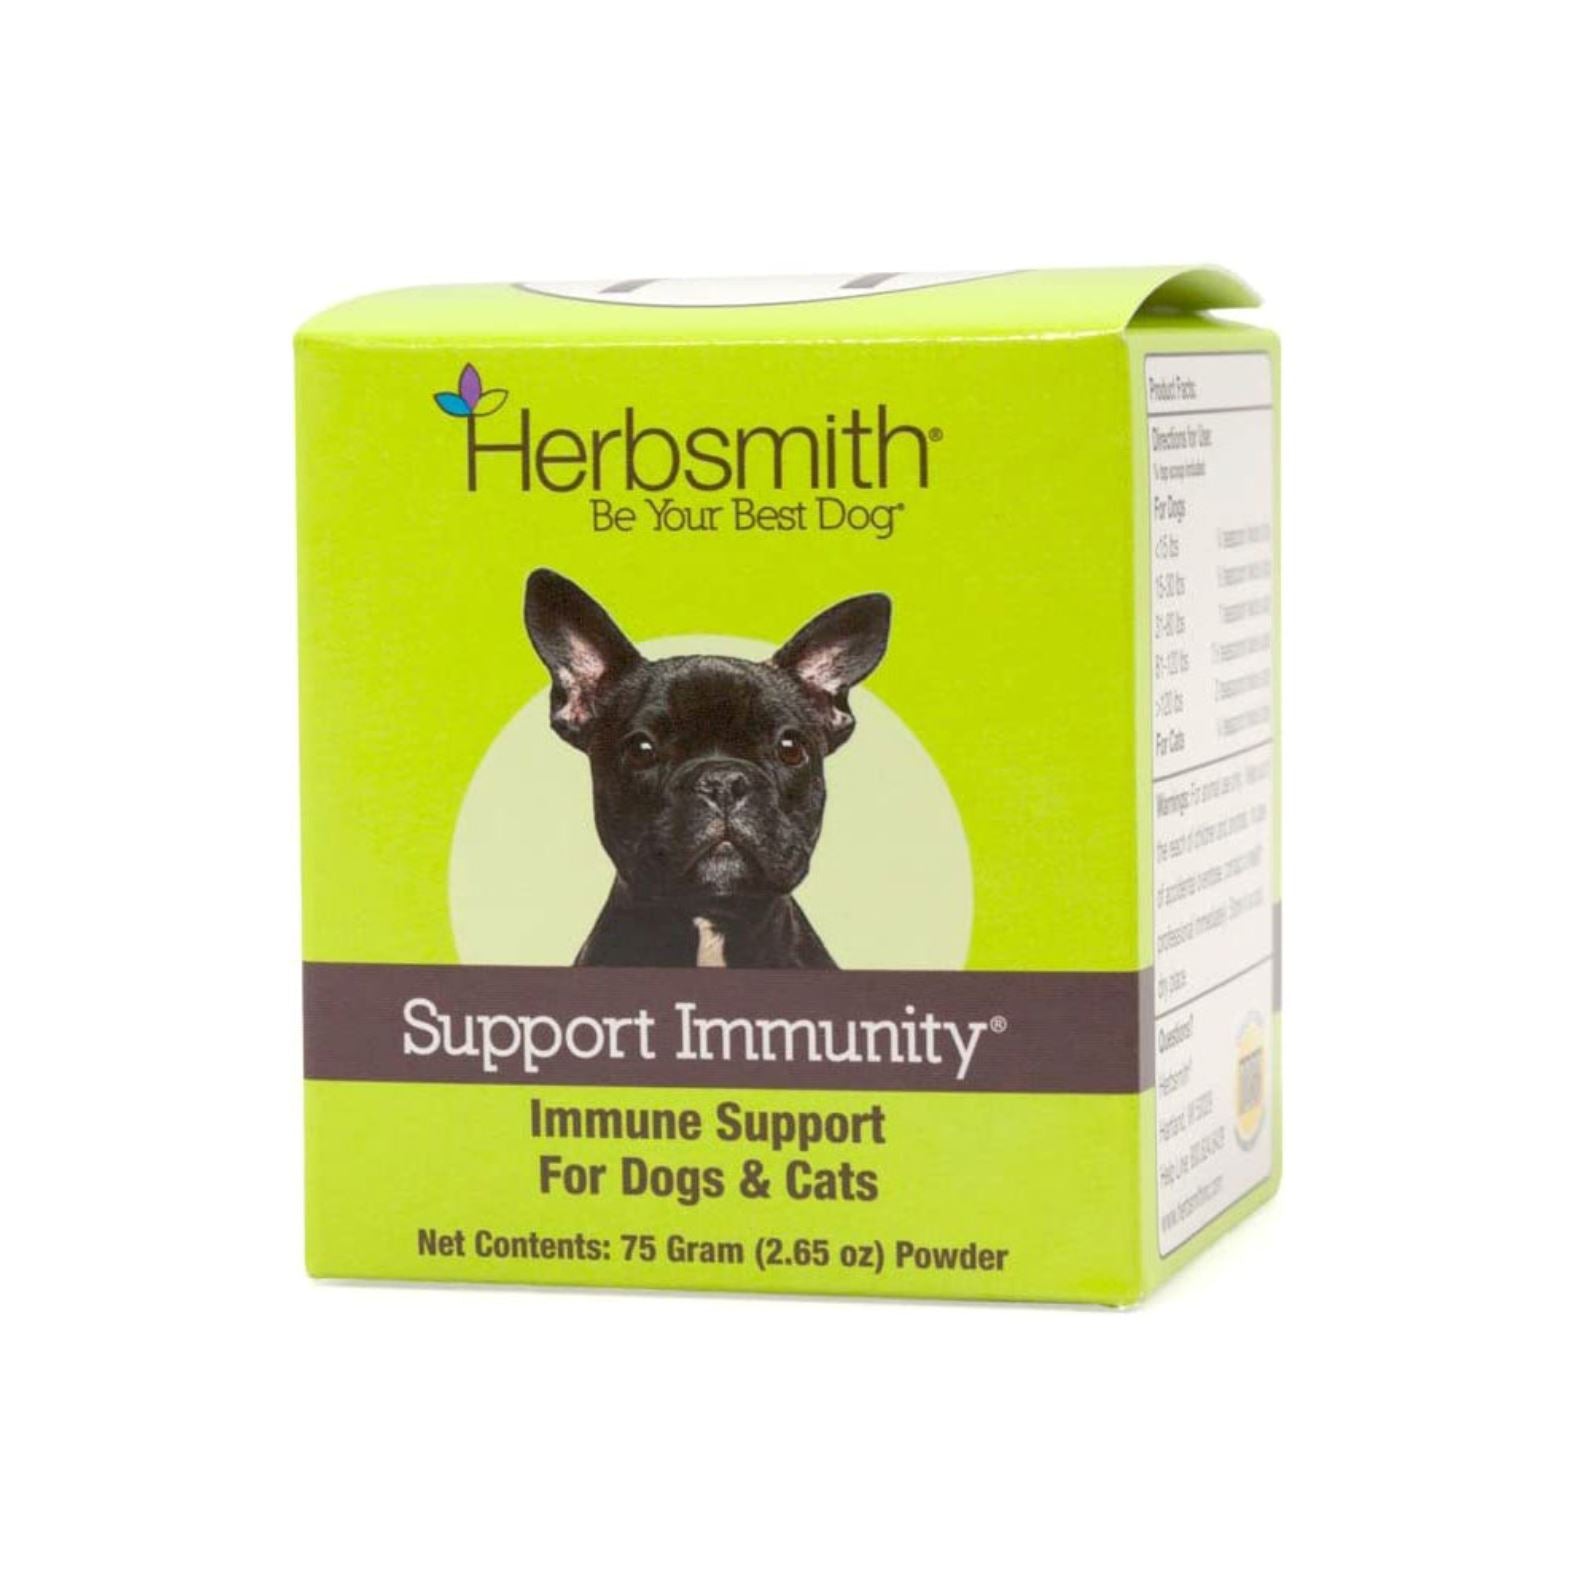 Herbsmith Support Immunity: Immune Support for Cats and Dogs